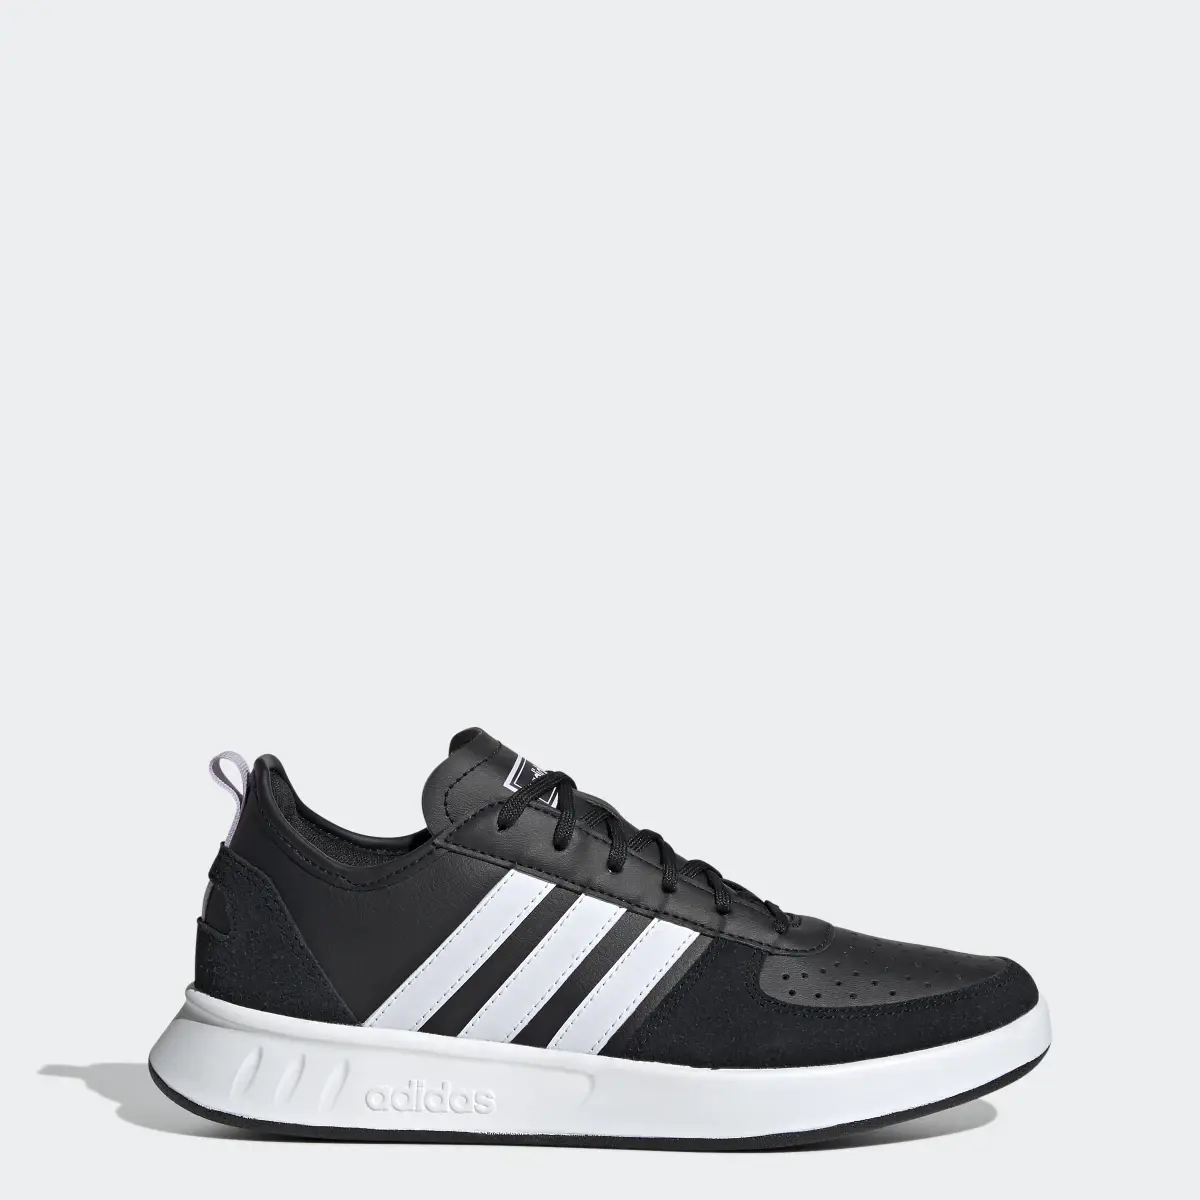 Adidas Court 80s Shoes. 1